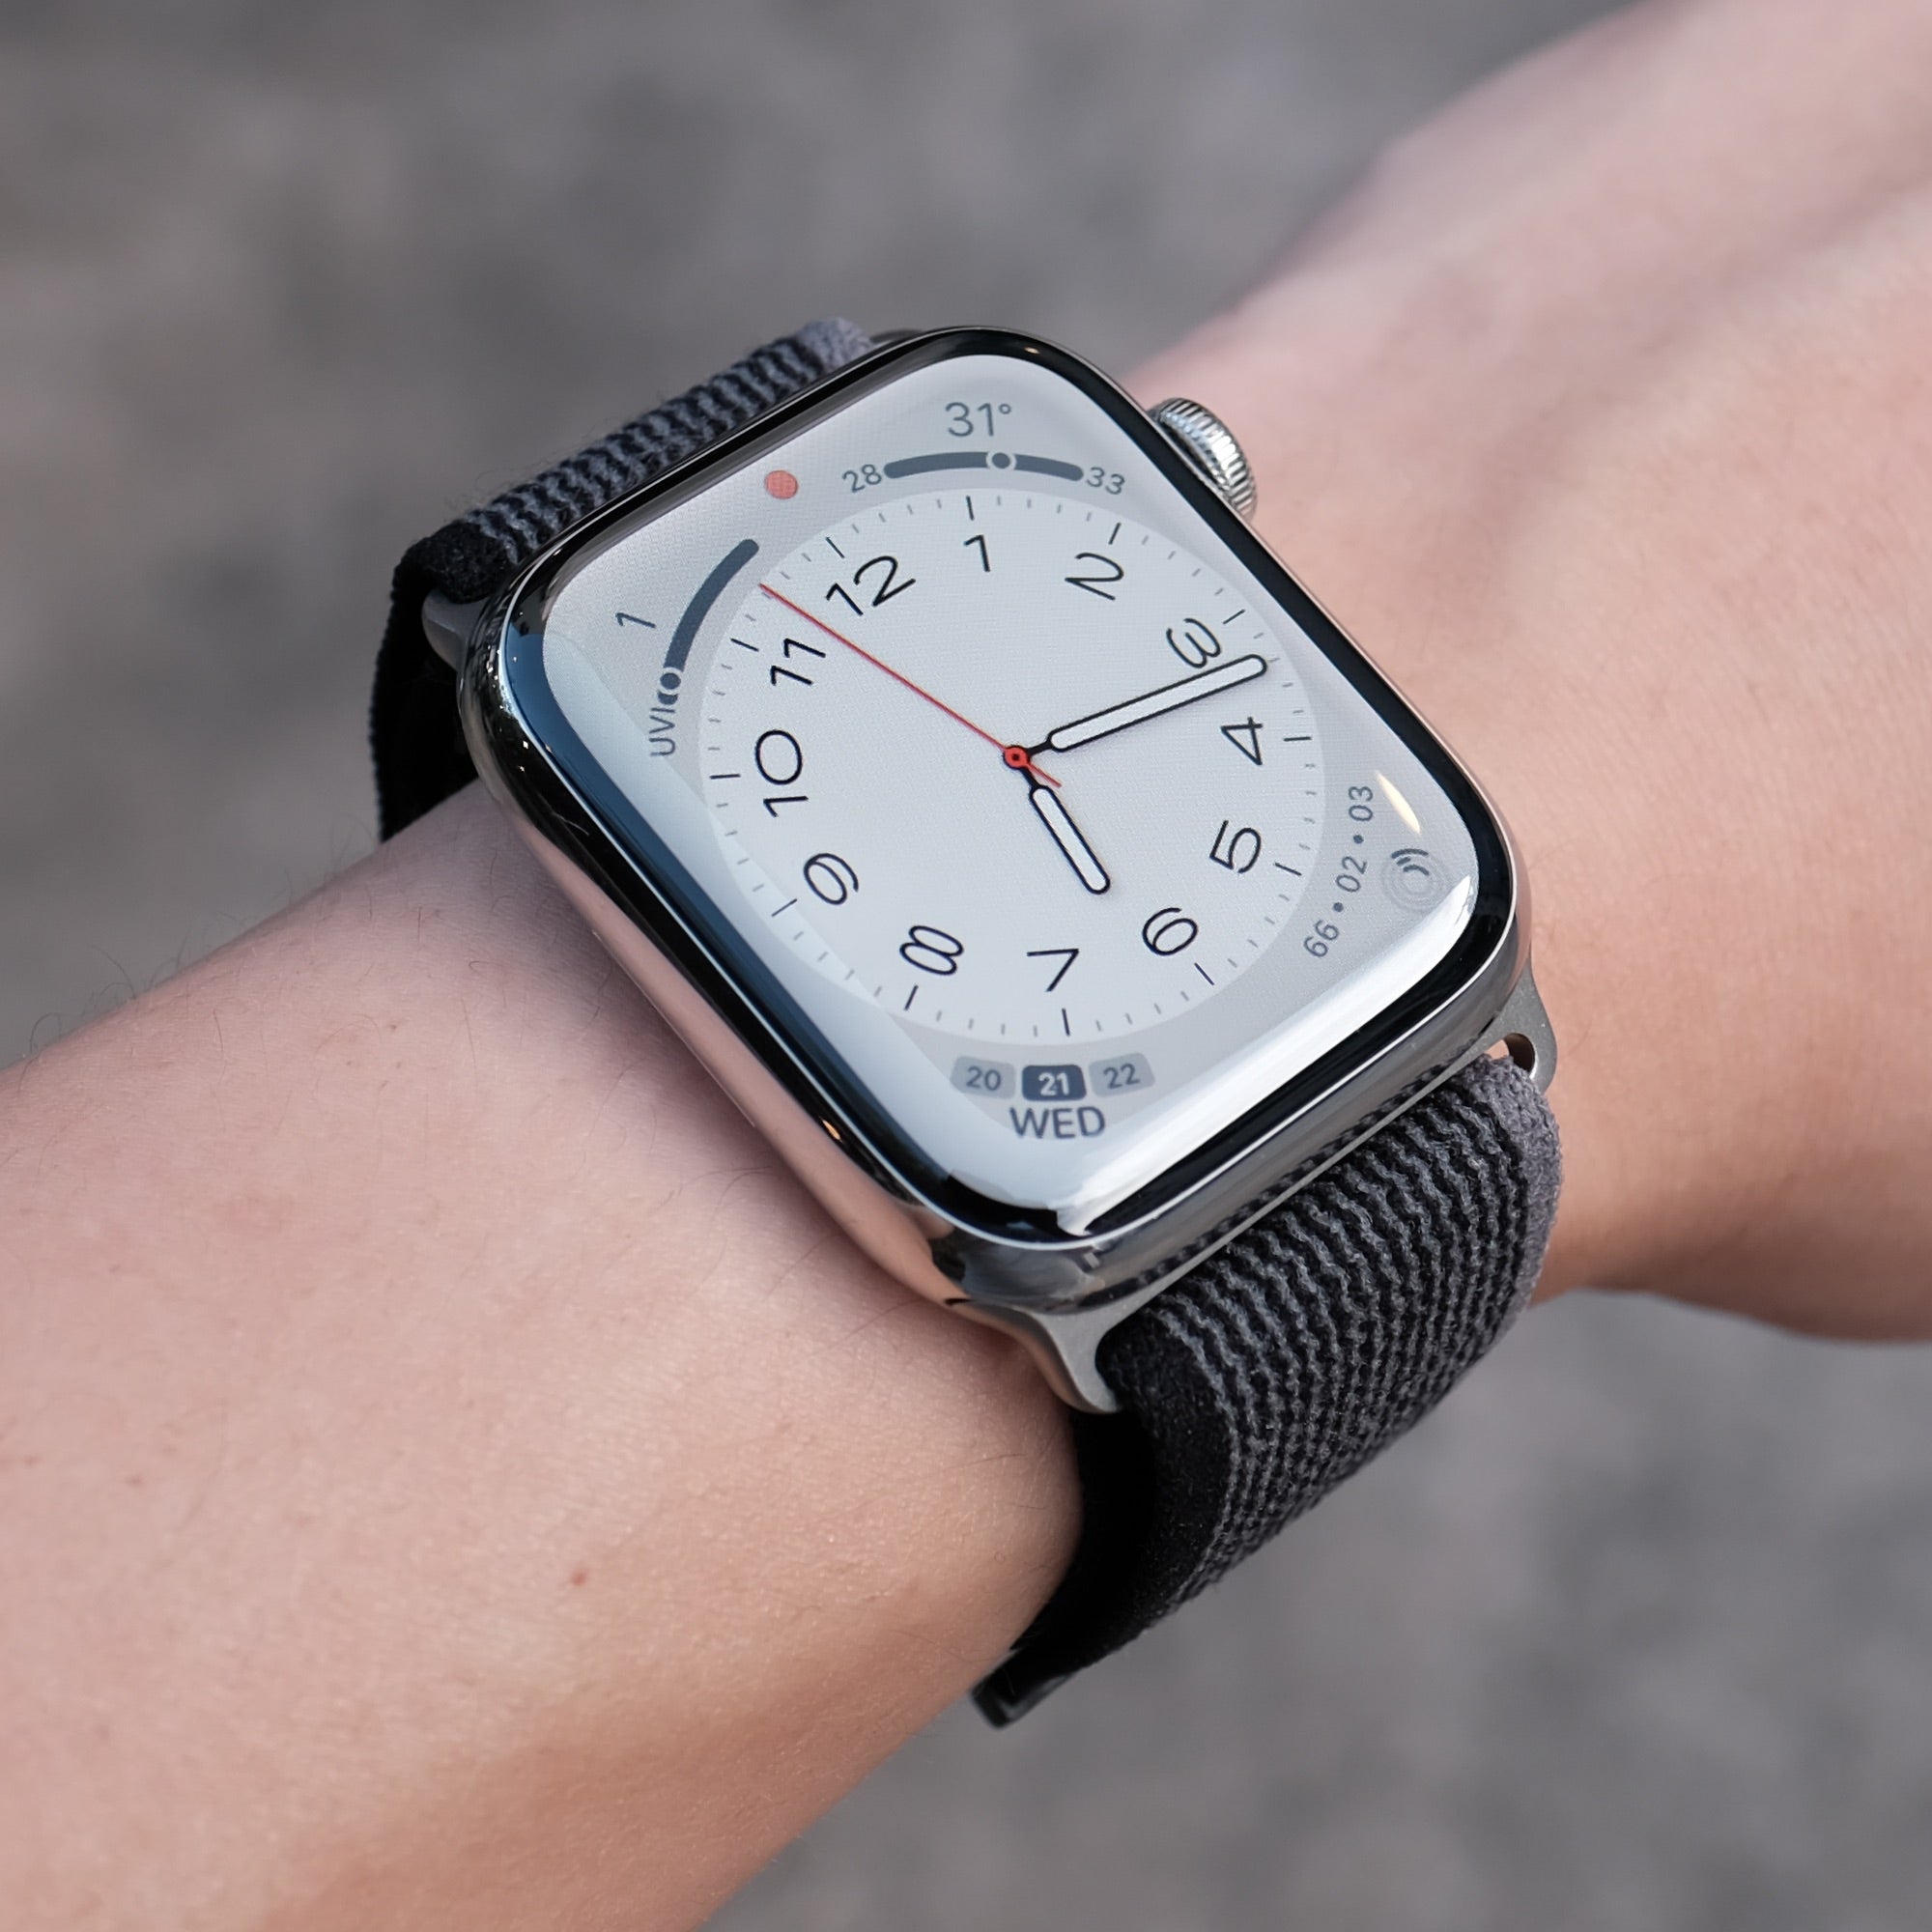 How to know whether your Apple Watch is connected to the internet or not